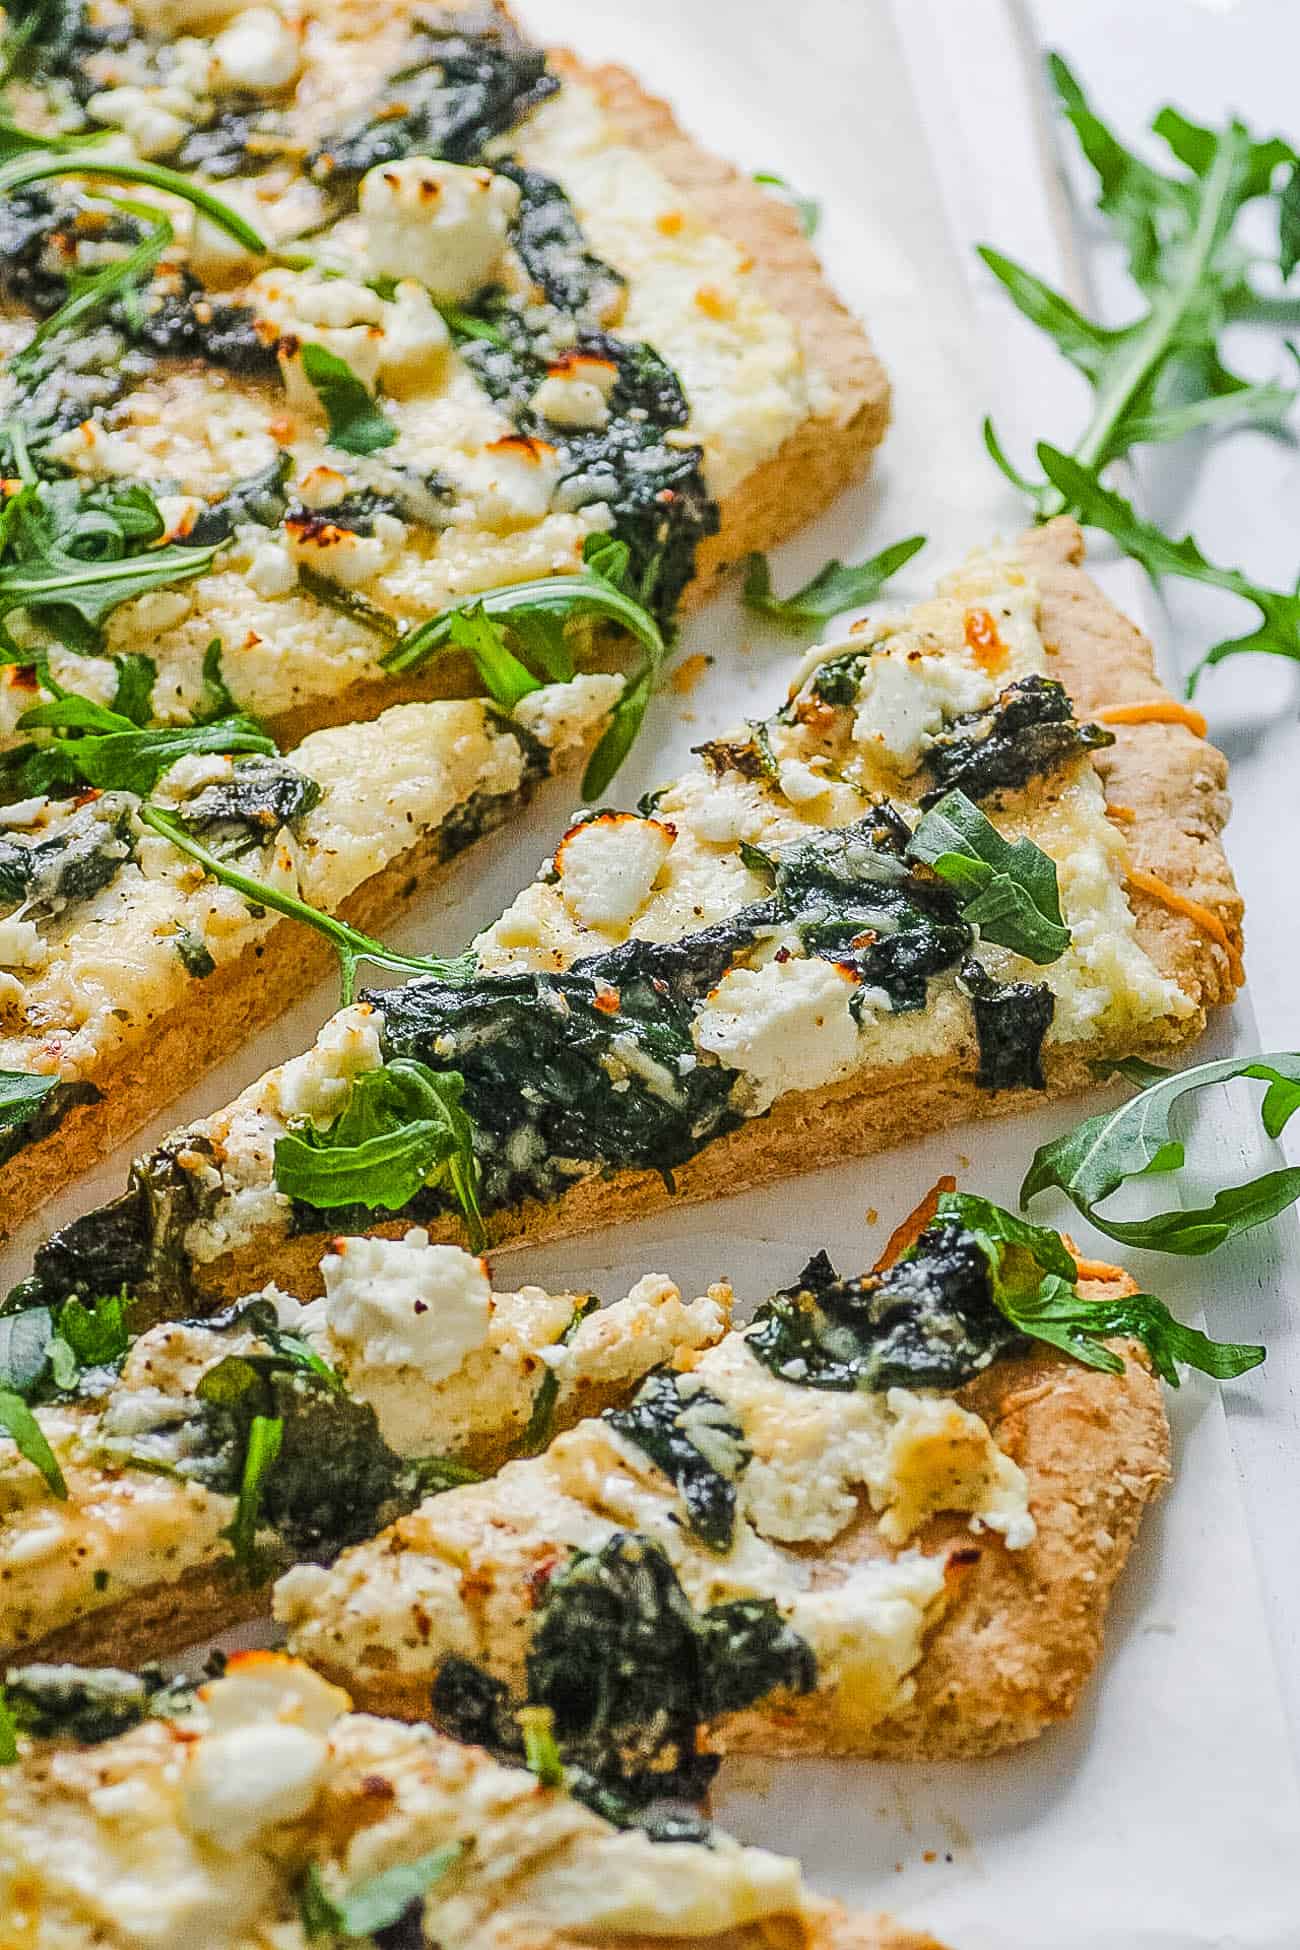 vegetarian florentine pizza - white pizza with spinach and parmesan cheese, sliced on a white platter